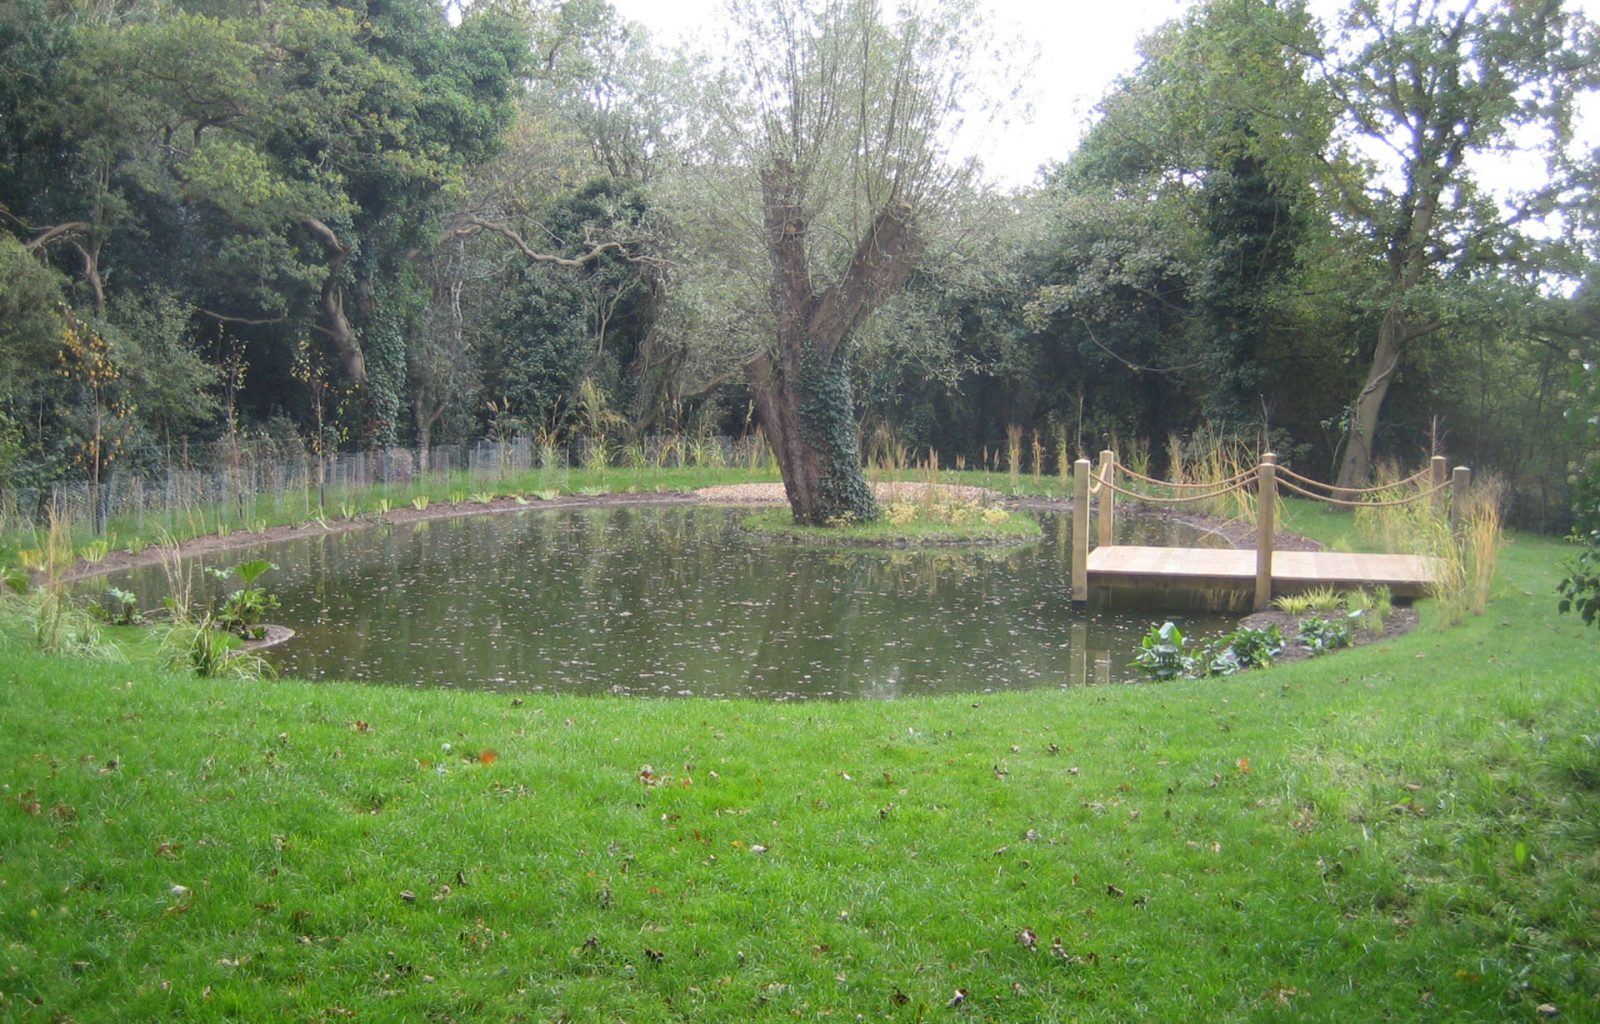 A natural large pond with island in middle containing mature willow tree. Pond has a wooden pontoon with roping to provide safe viewing and seating